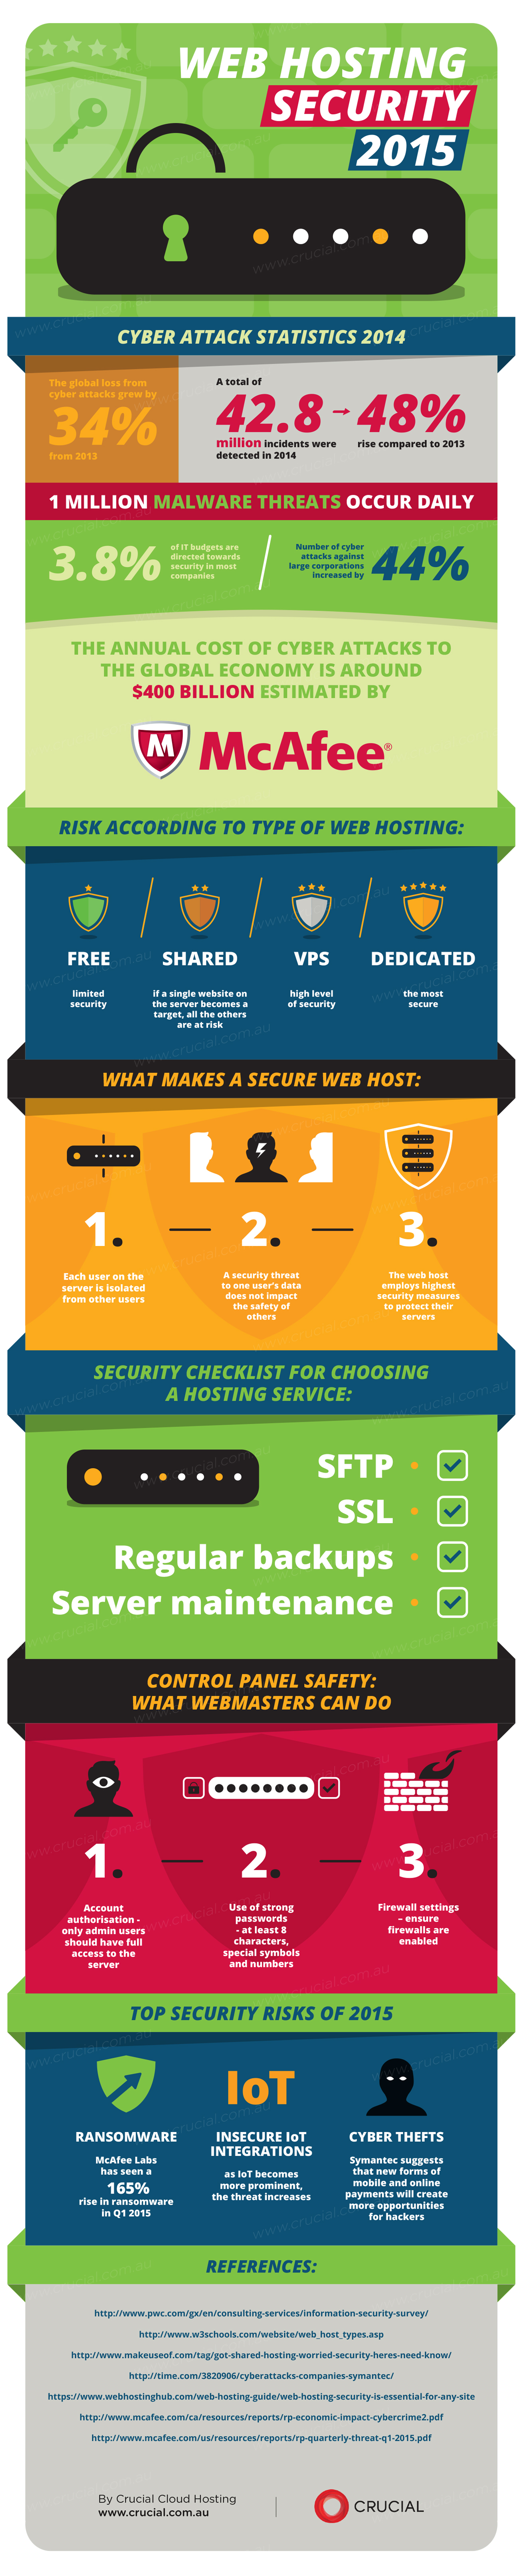 Infographic: Web Hosting Security in 2015 | Broadcast | Crucial